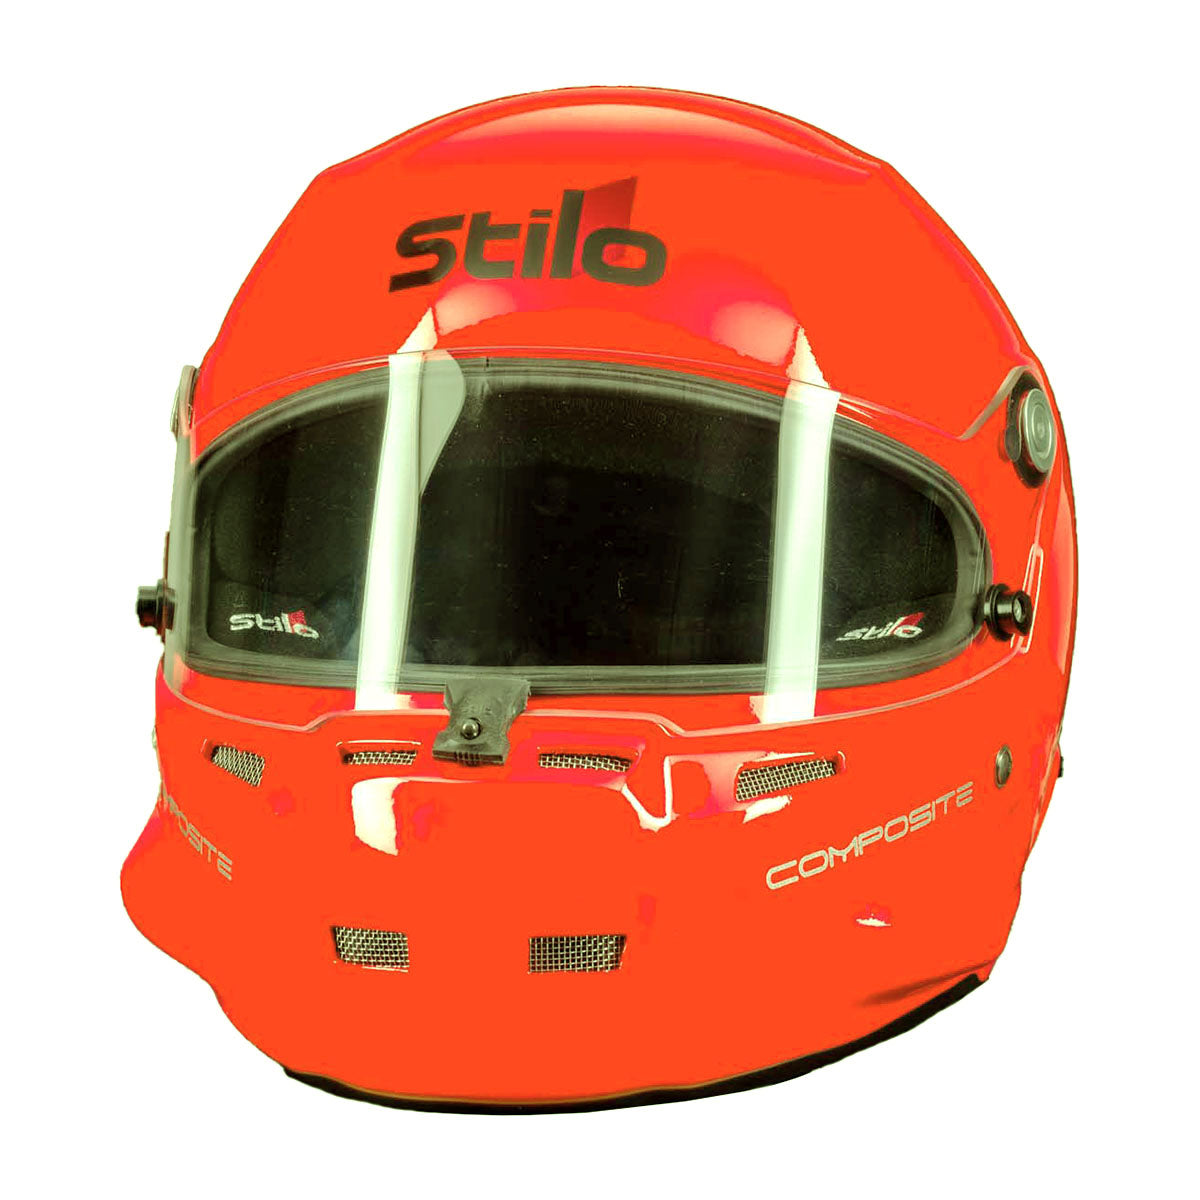 "Get ahead with the Stilo ST5.1 GT Offshore Racing Helmet - Ultimate Safety and Style"